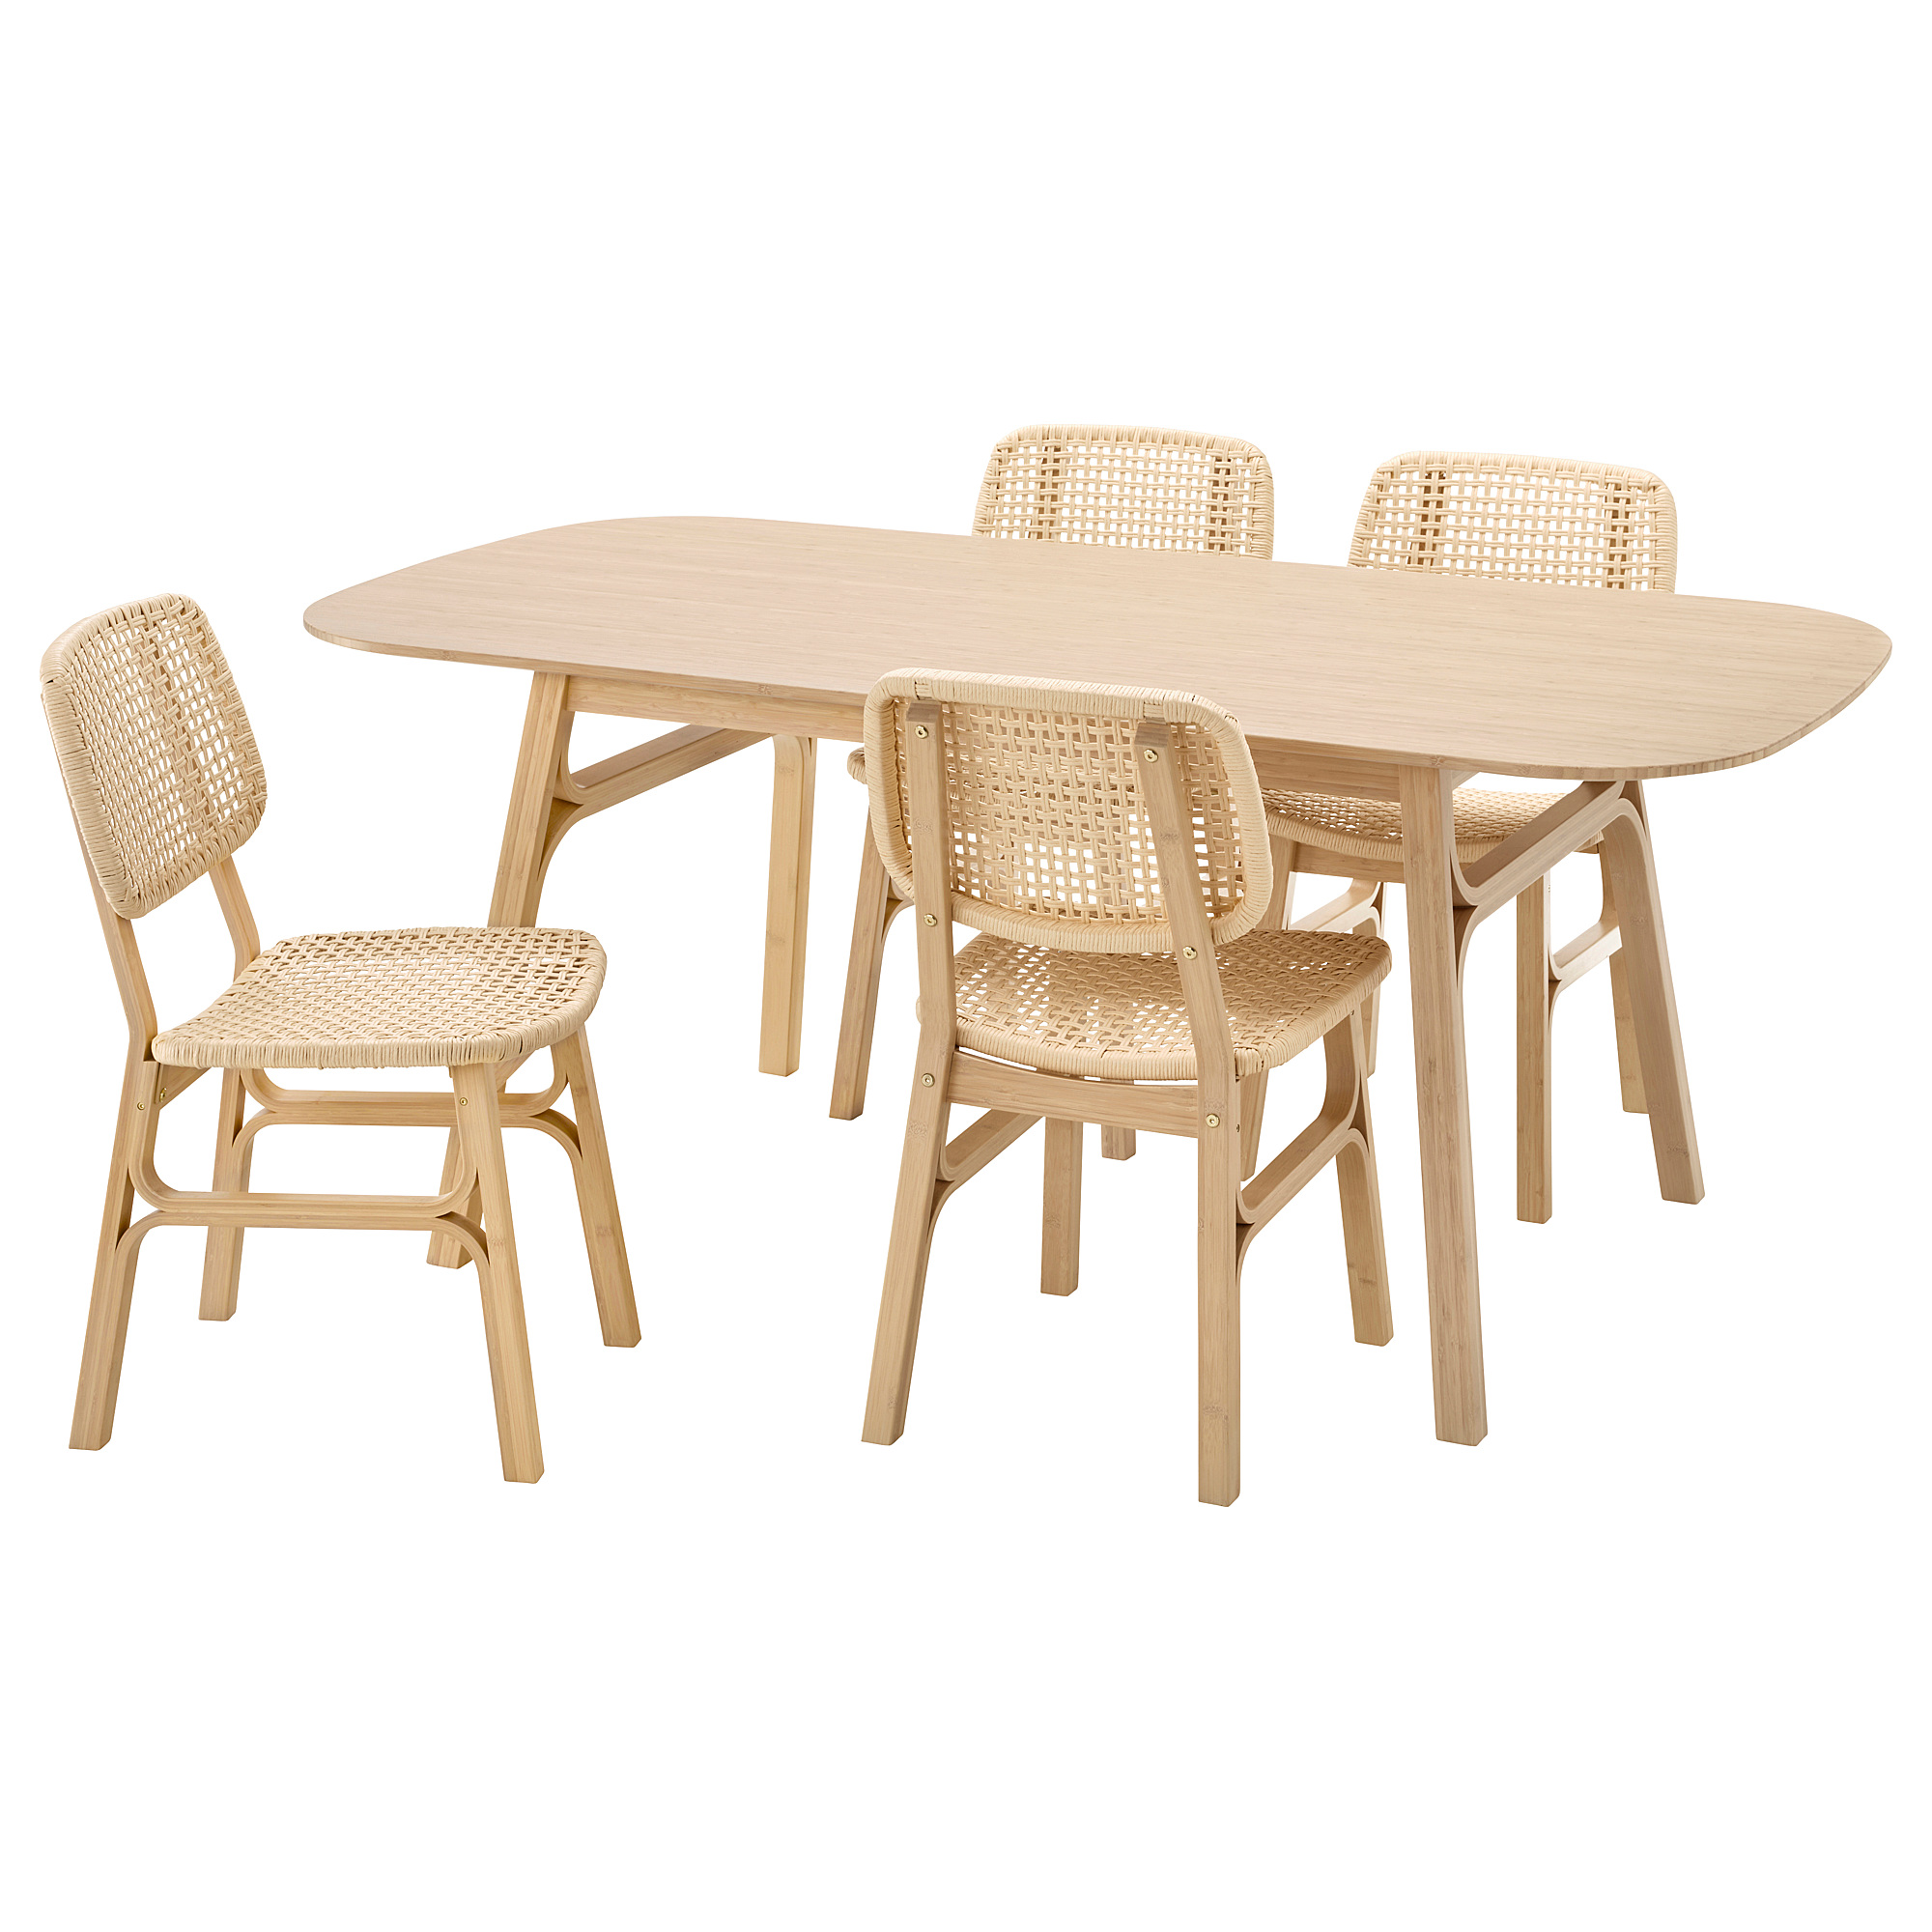 VOXLÖV/VOXLÖV table and 4 chairs